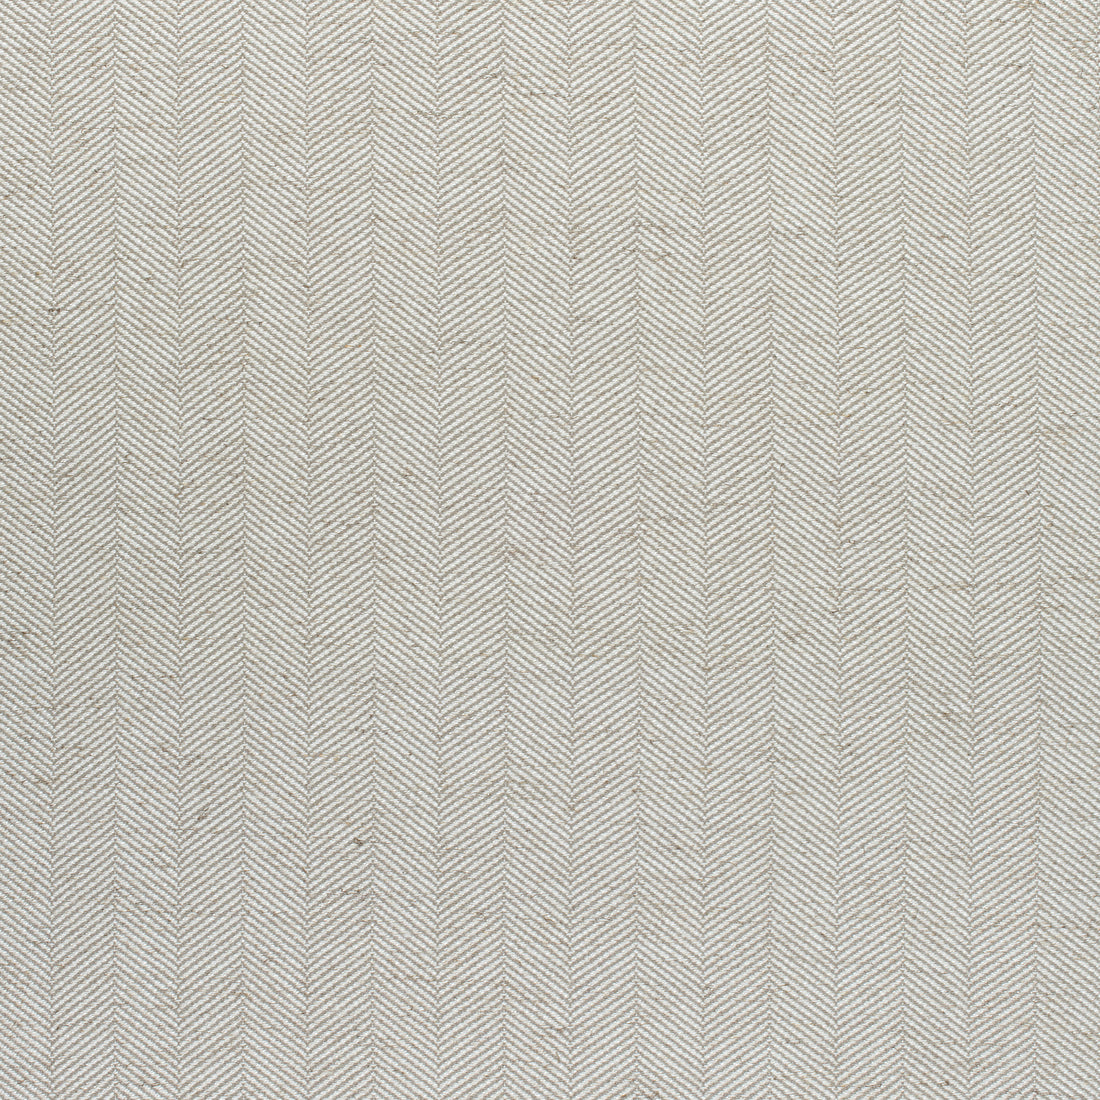 Hamilton Herringbone fabric in stone color - pattern number W80679 - by Thibaut in the Pinnacle collection